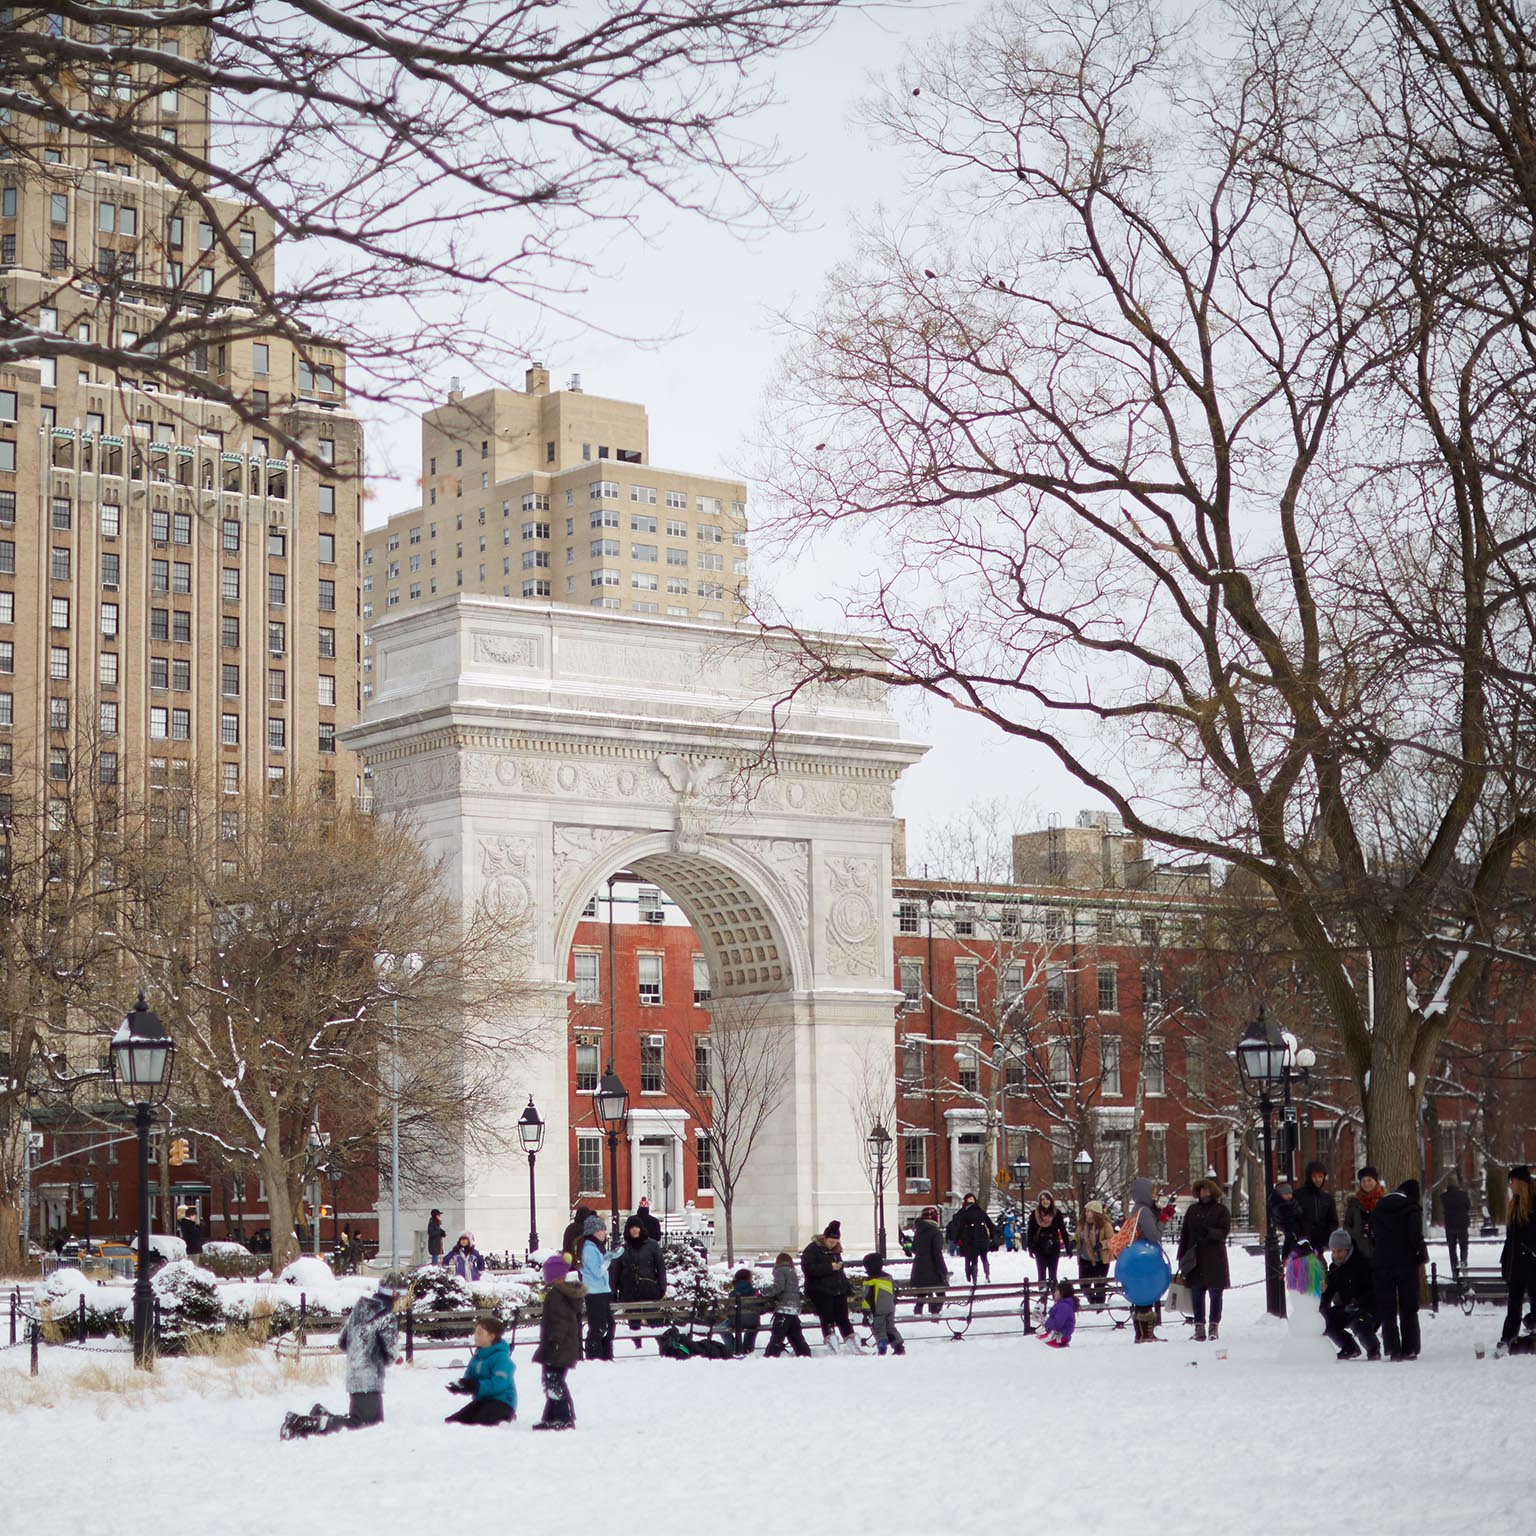 Families enjoy the snow in Washington Square Park during winter recess.